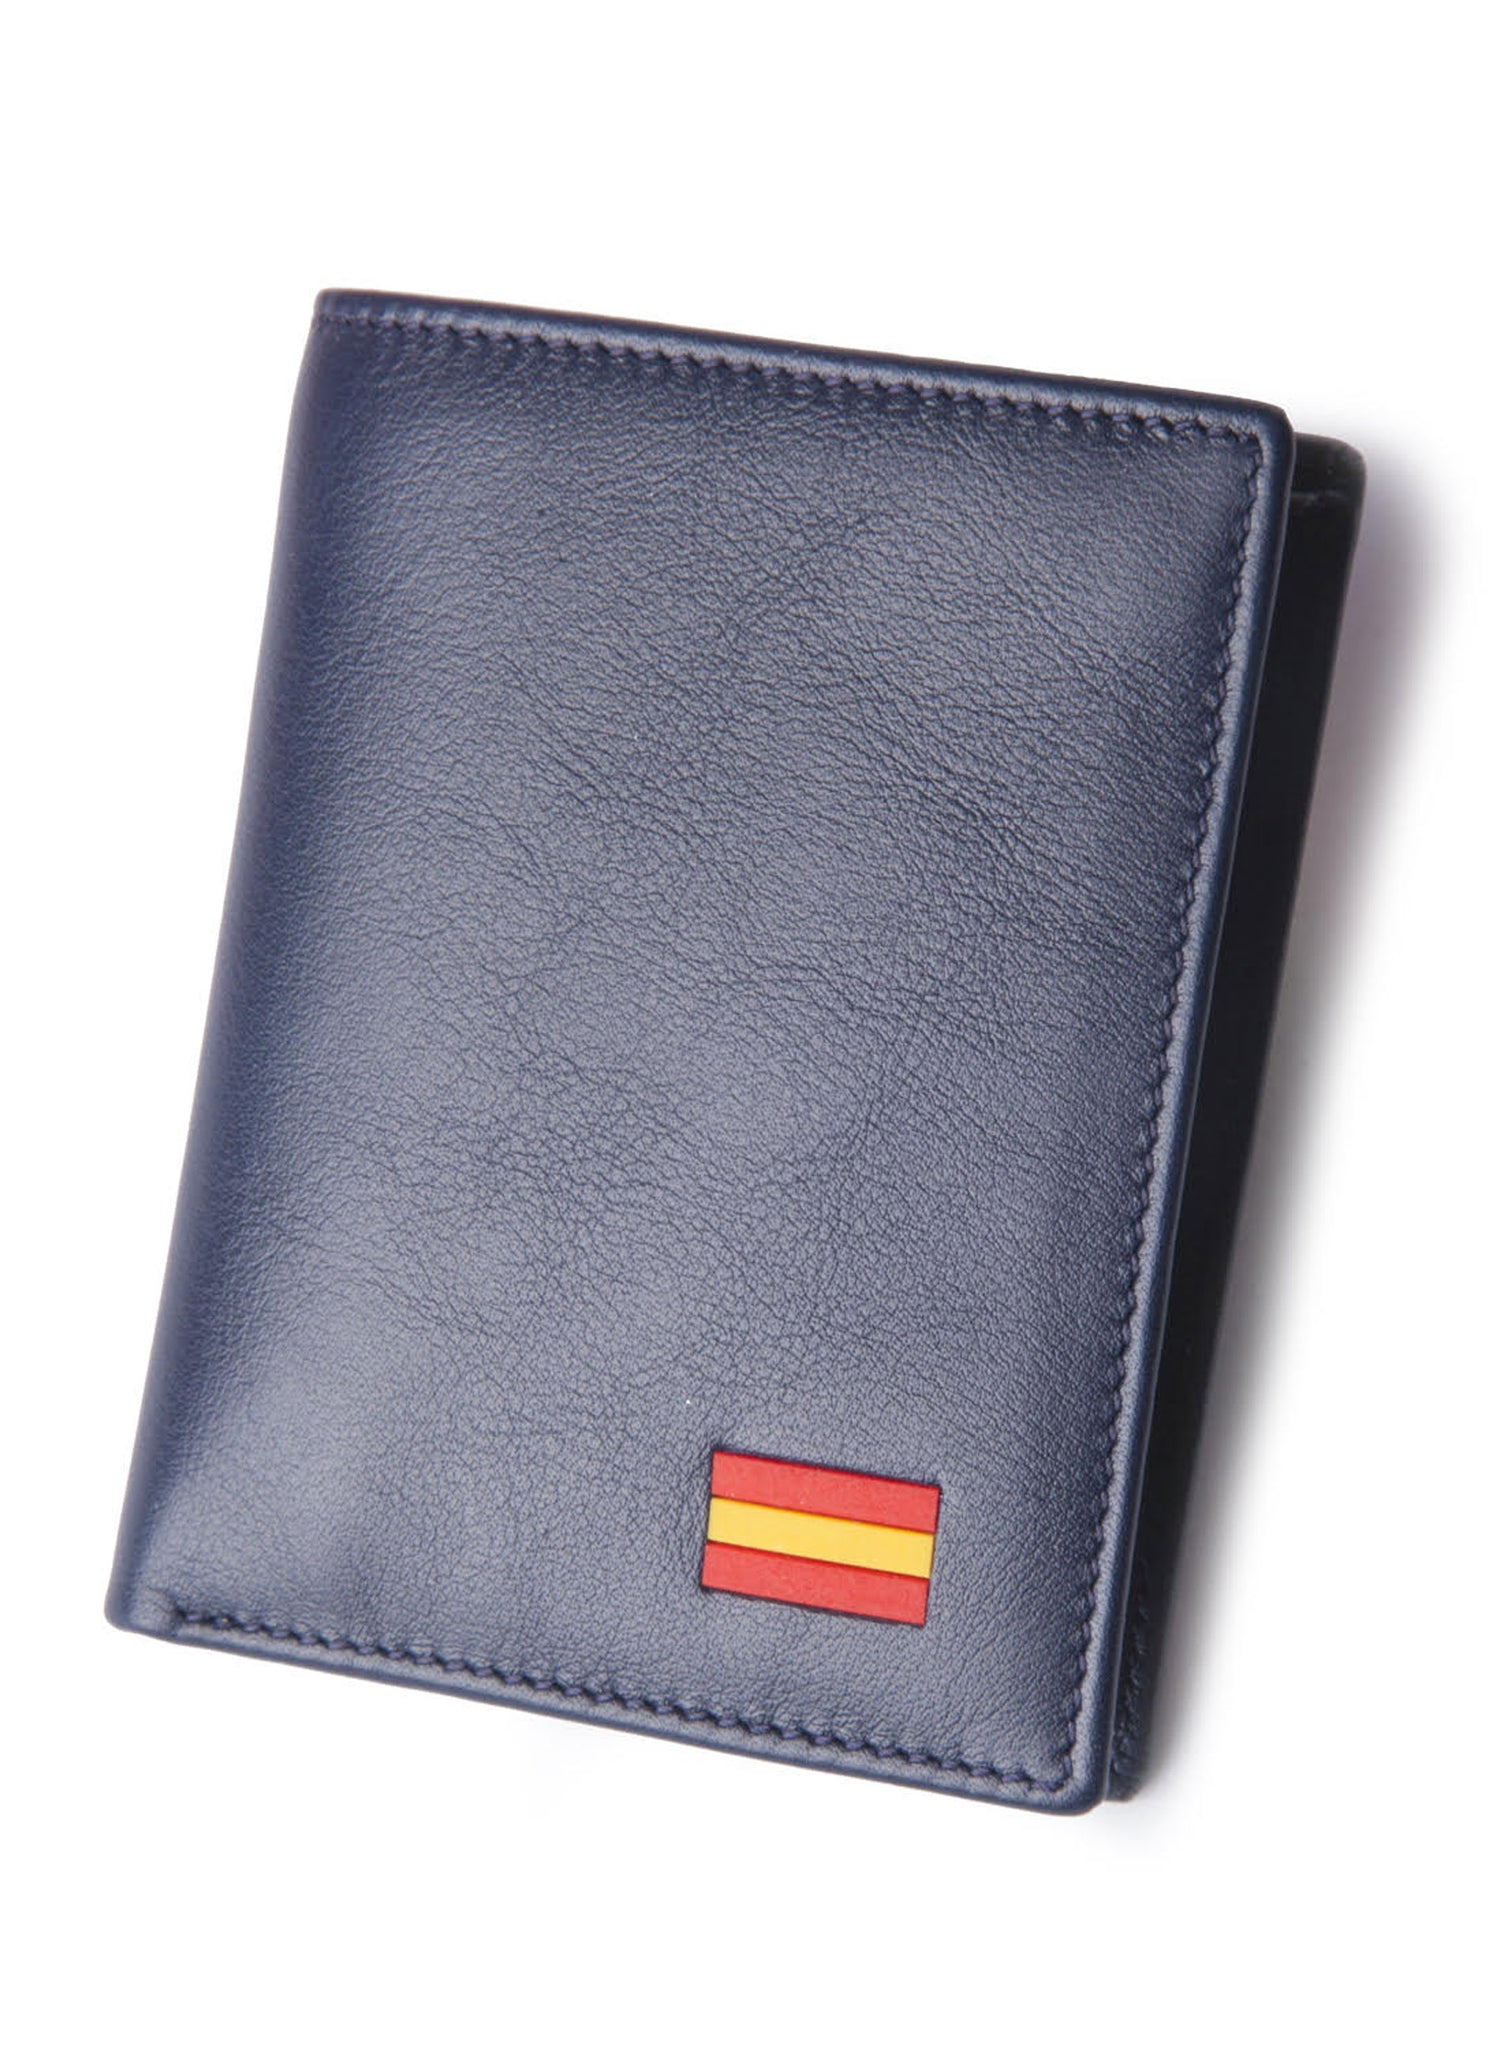 Small Navy Blue Wallet Spain 